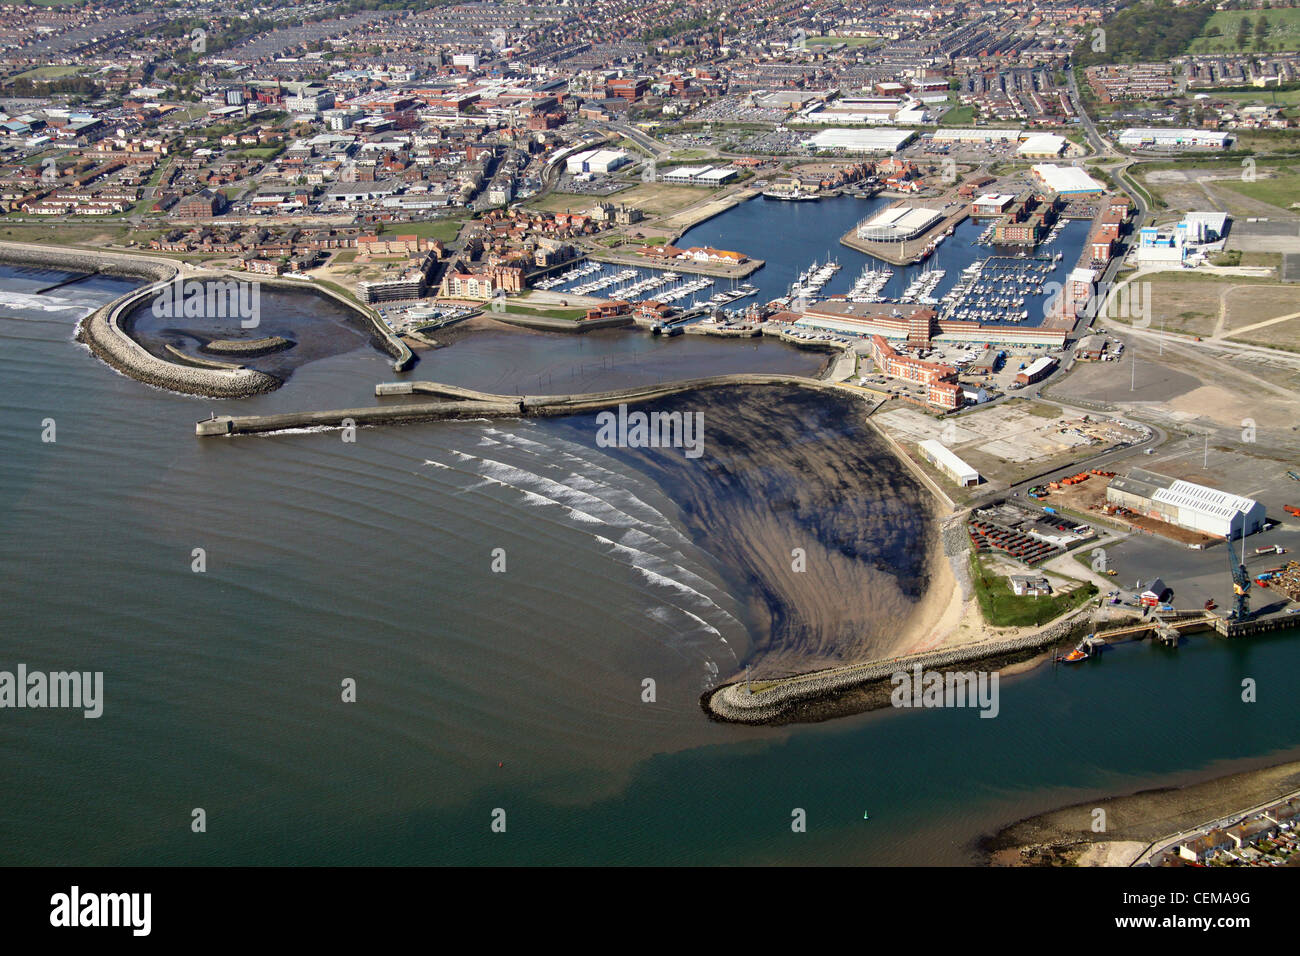 Aerial image of Hartlepool with the Heugh Breakwater, Marina and docks with Heritage centre Stock Photo